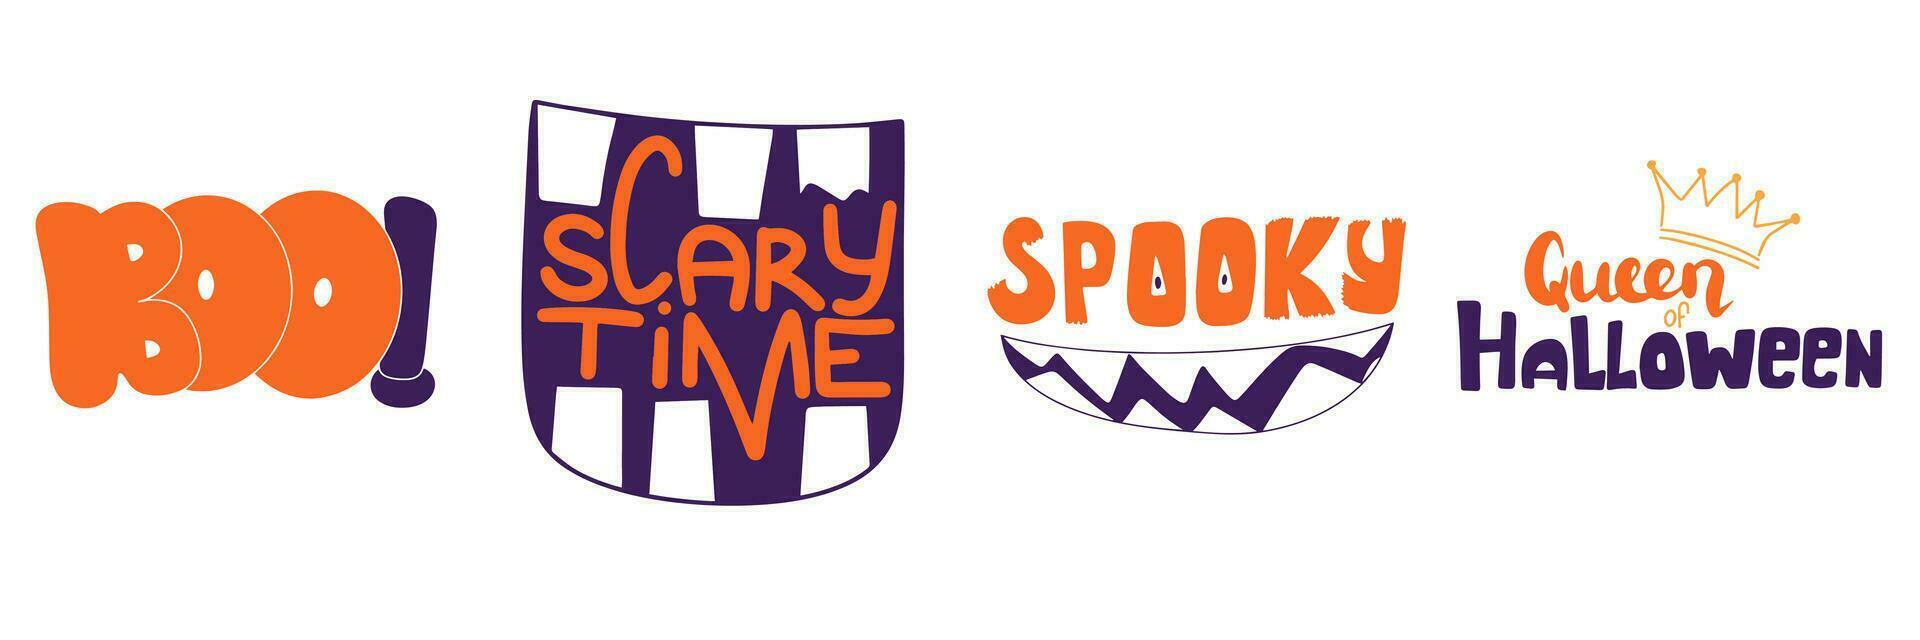 Set of Halloween short phrases. Boo, scary time, spooky, queen of Halloween. Halloween decor in orange and purple color. Vector illustration.